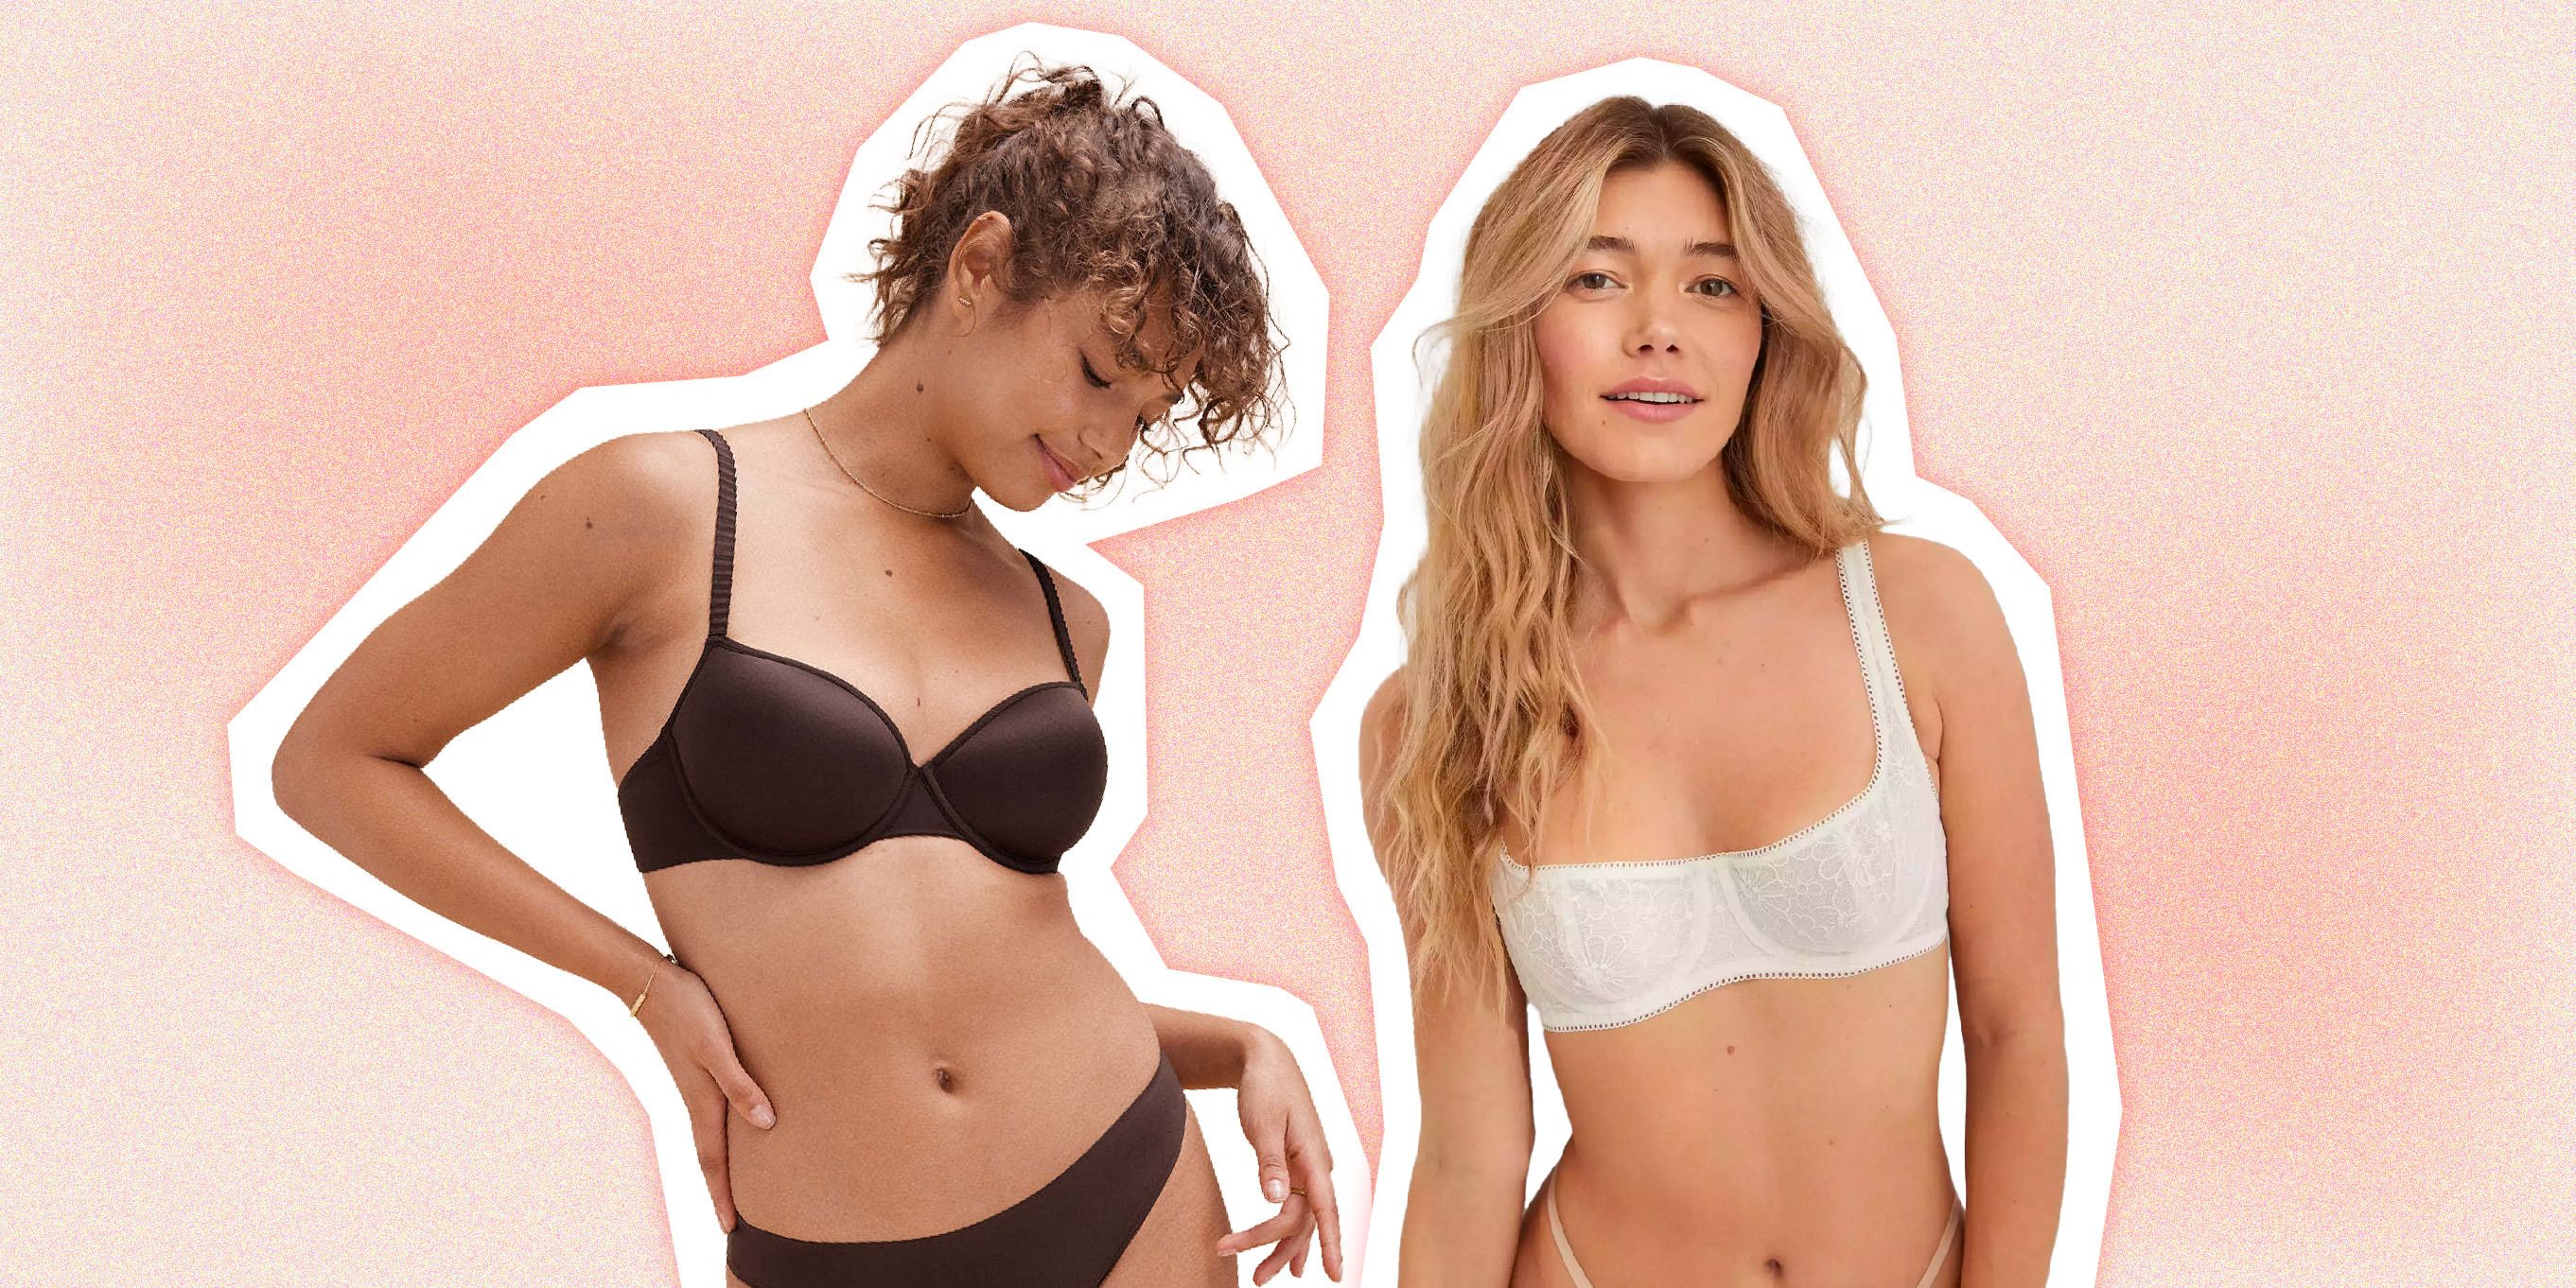 3 Reasons Why Bra Brands Should Welcome Men With Breasts